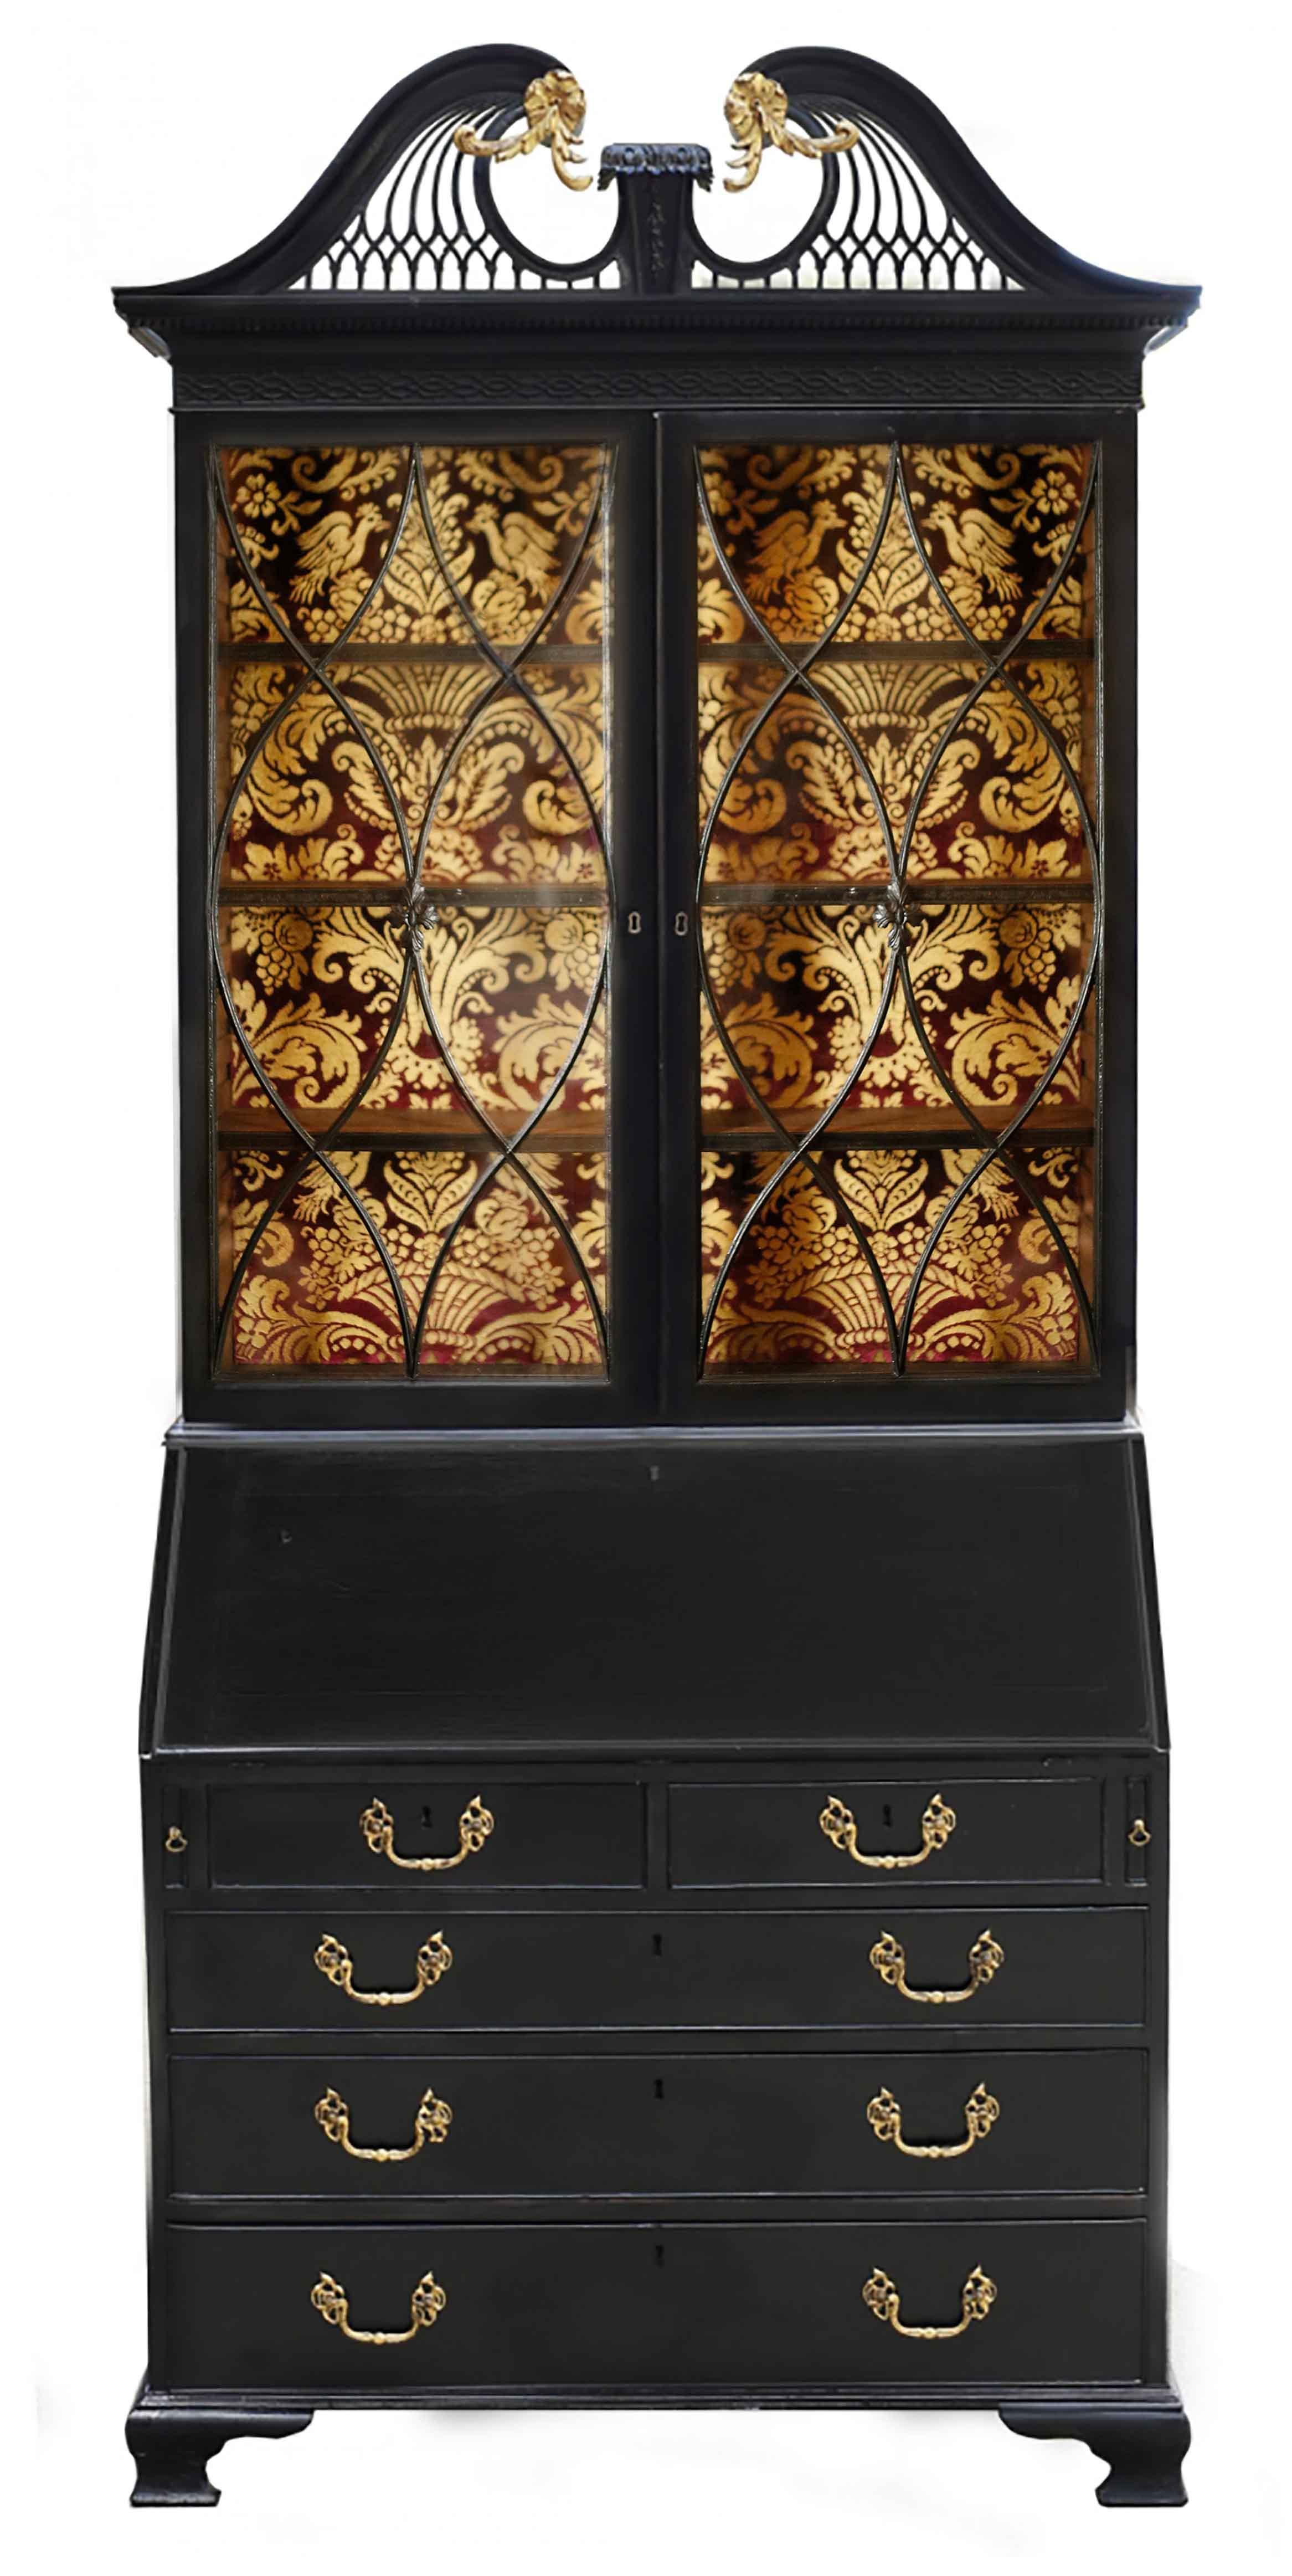 An exquisite English Georgian secretary bookcase of exceptional design and detail. The swan-necked broken pediment features gilt acanthus flourishes and rosettes with a central plinth with graduated bellflowers. The tympanum is composed of delicate